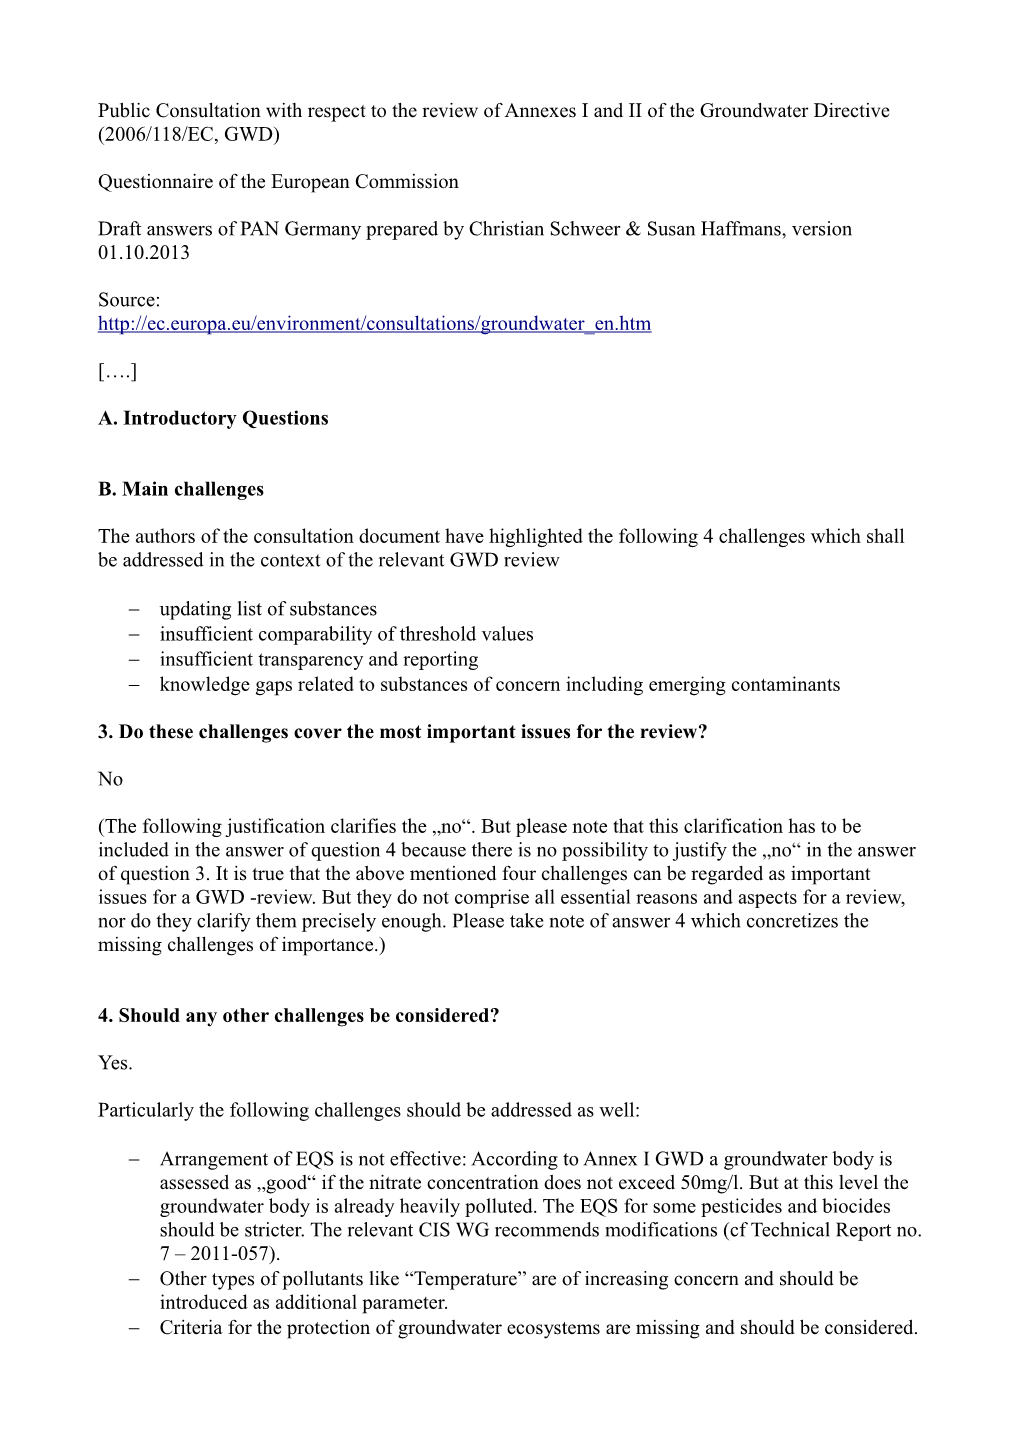 Questionnaire of the European Commission